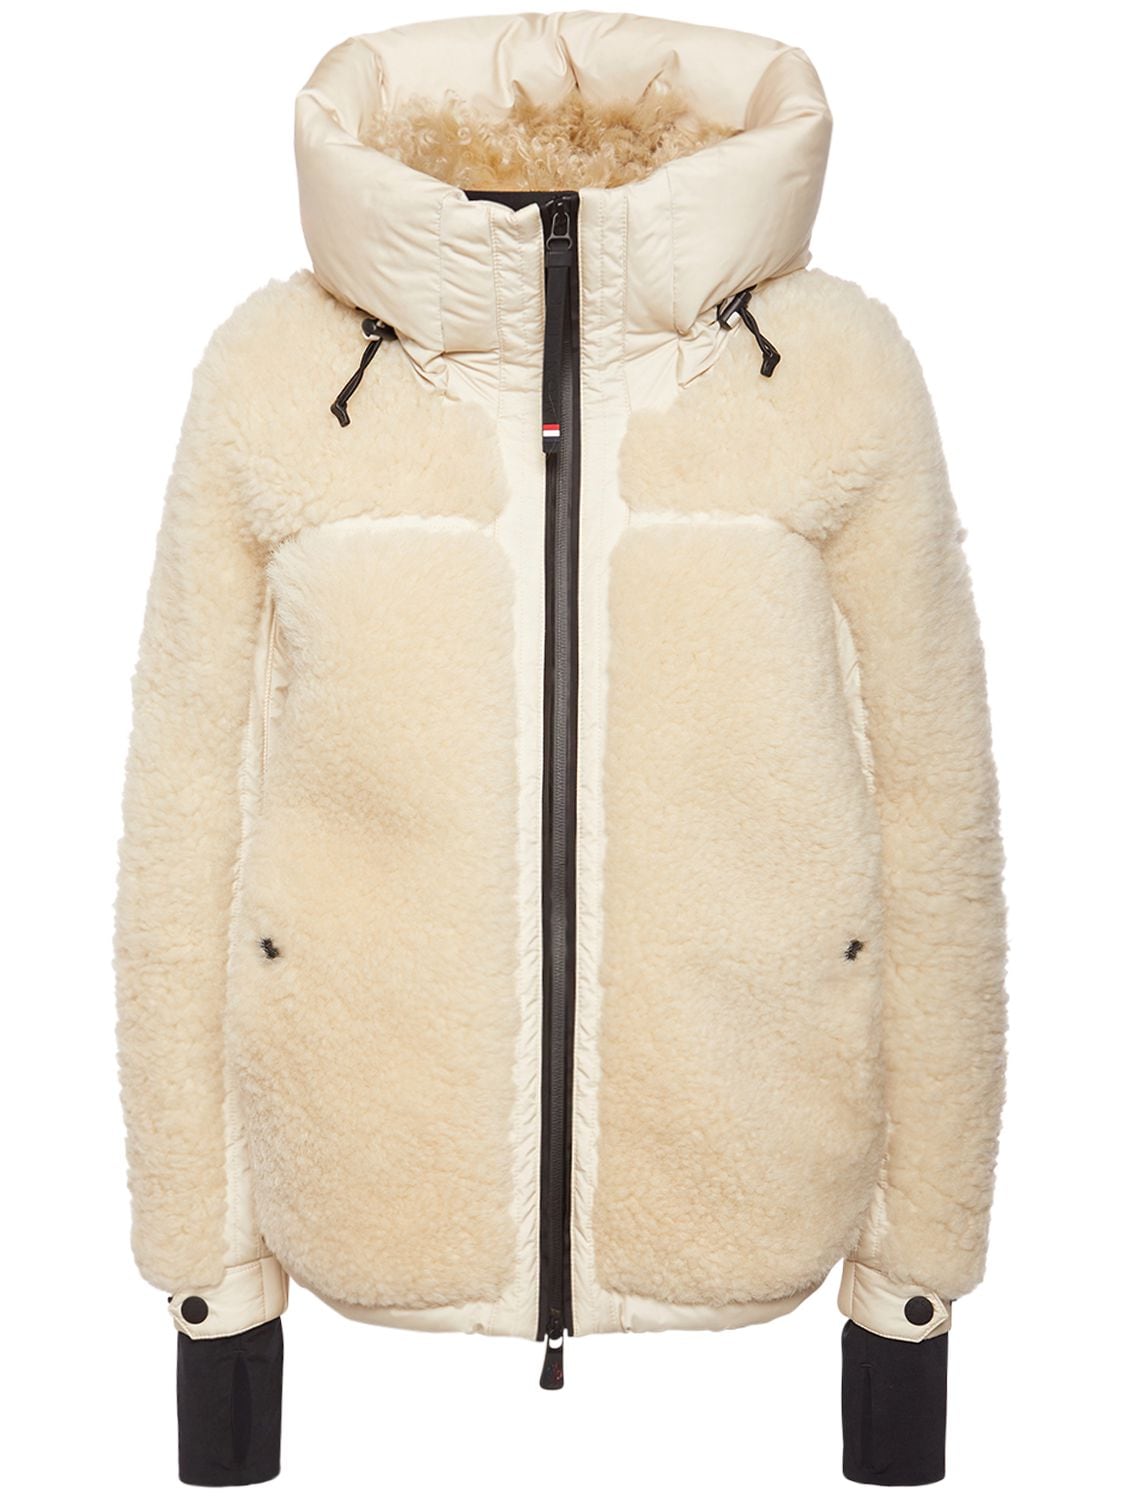 Moncler Women's Epicea Shearling Down Bomber Jacket In Natural